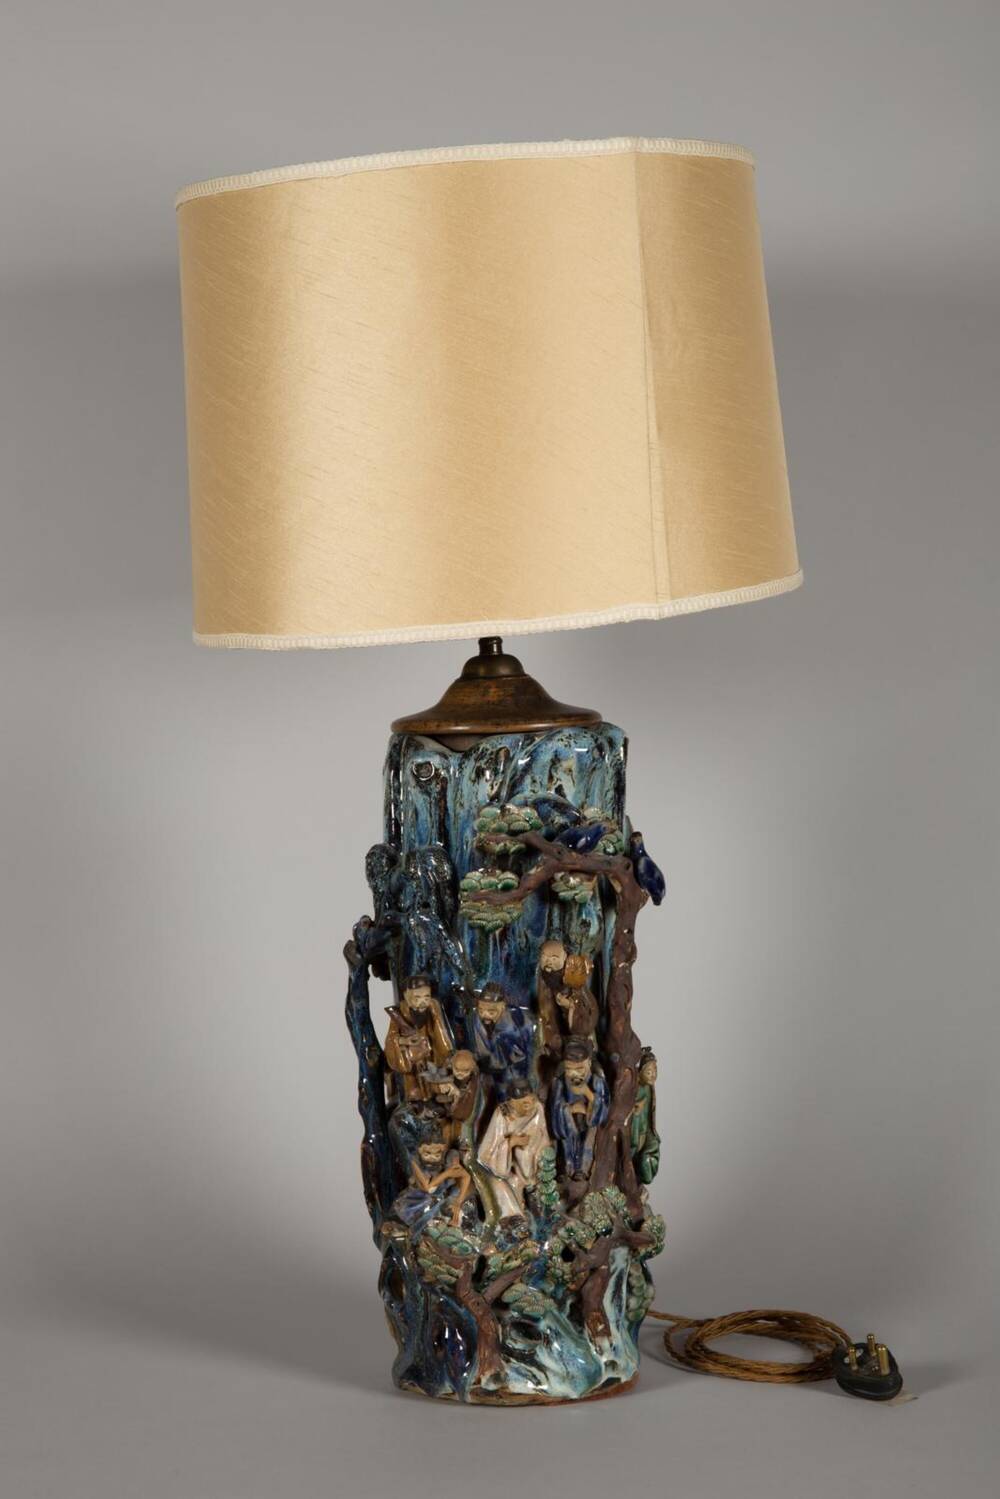 Lamp, with a Chinese base and a pale cream lampshade.